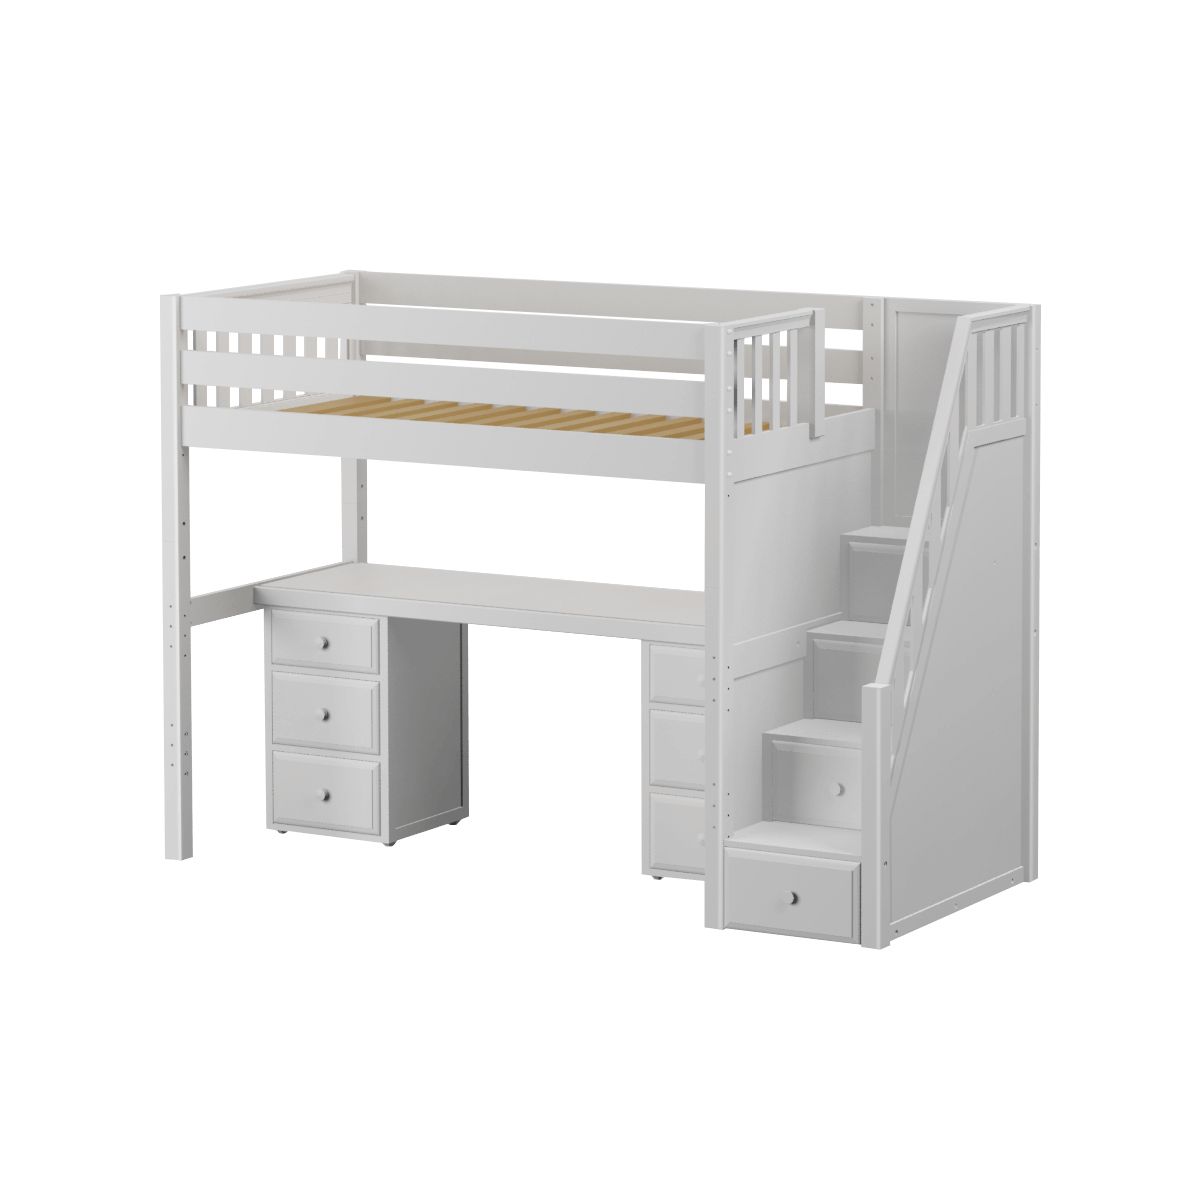 Maxtrix Twin High Loft Bed with Stairs with Long Desk